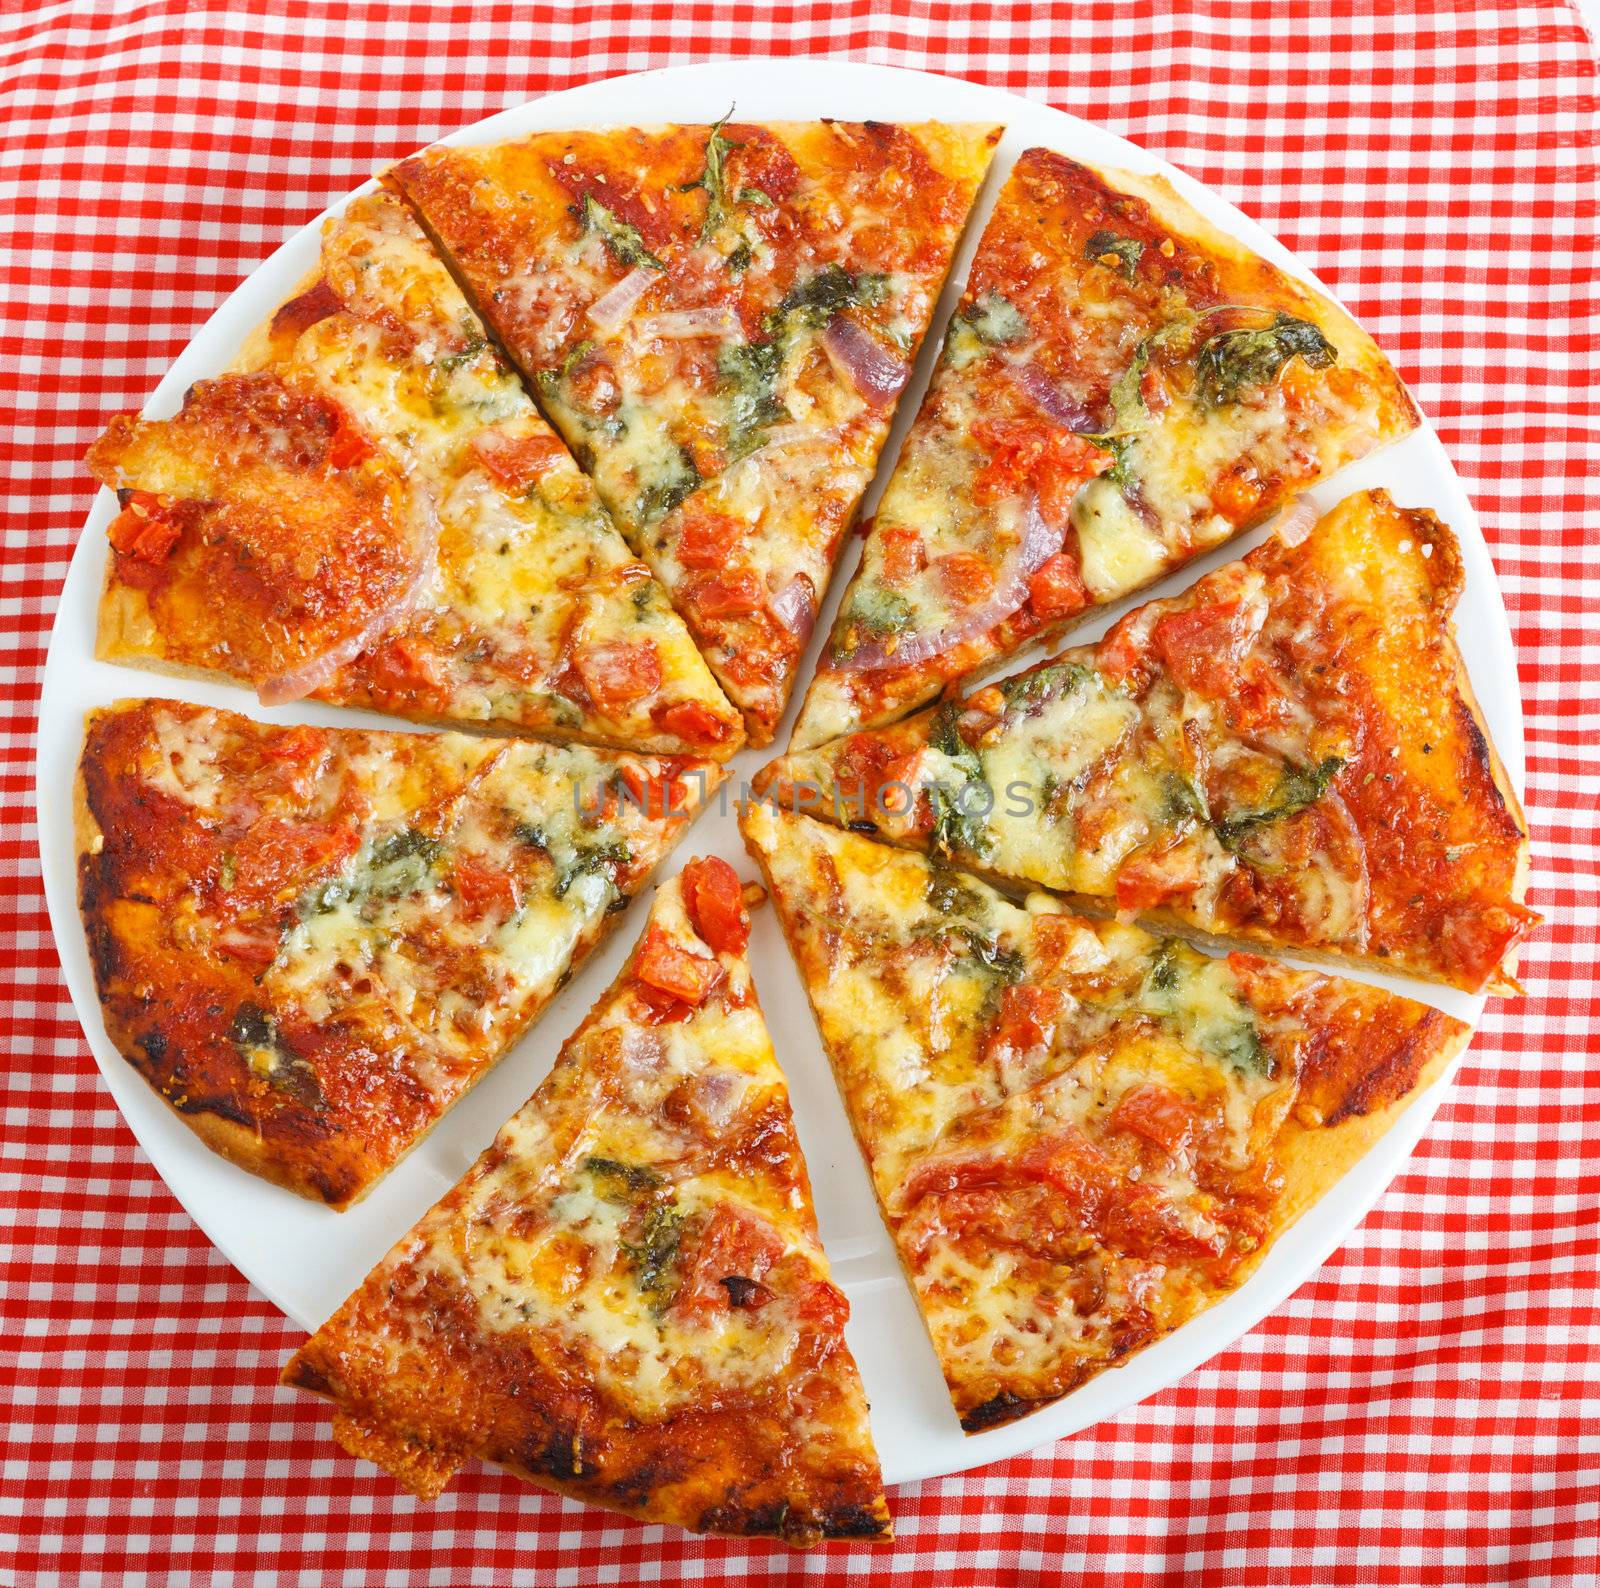 A delicious homemade round pizza on a red checkered table cloth